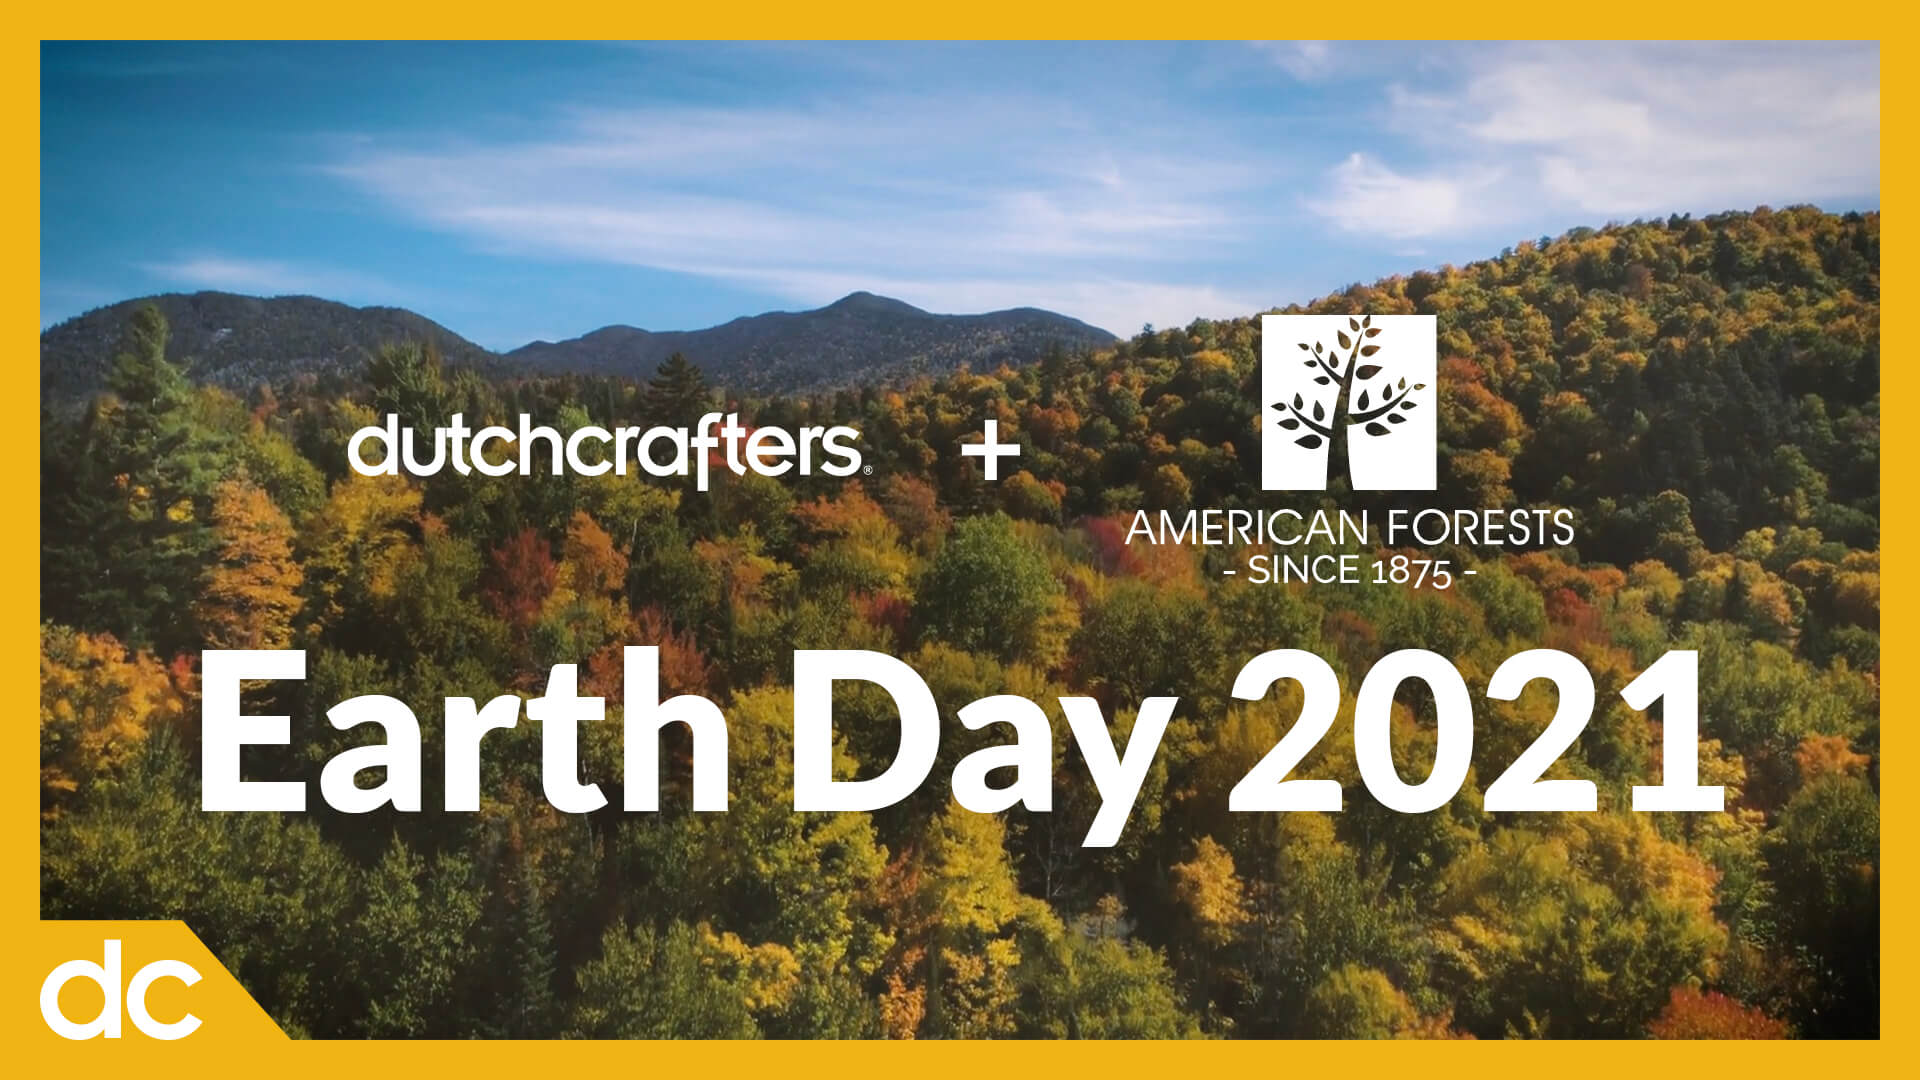 Video Title Image: DutchCrafters + American Forests Planting Trees for Earth Day 2021